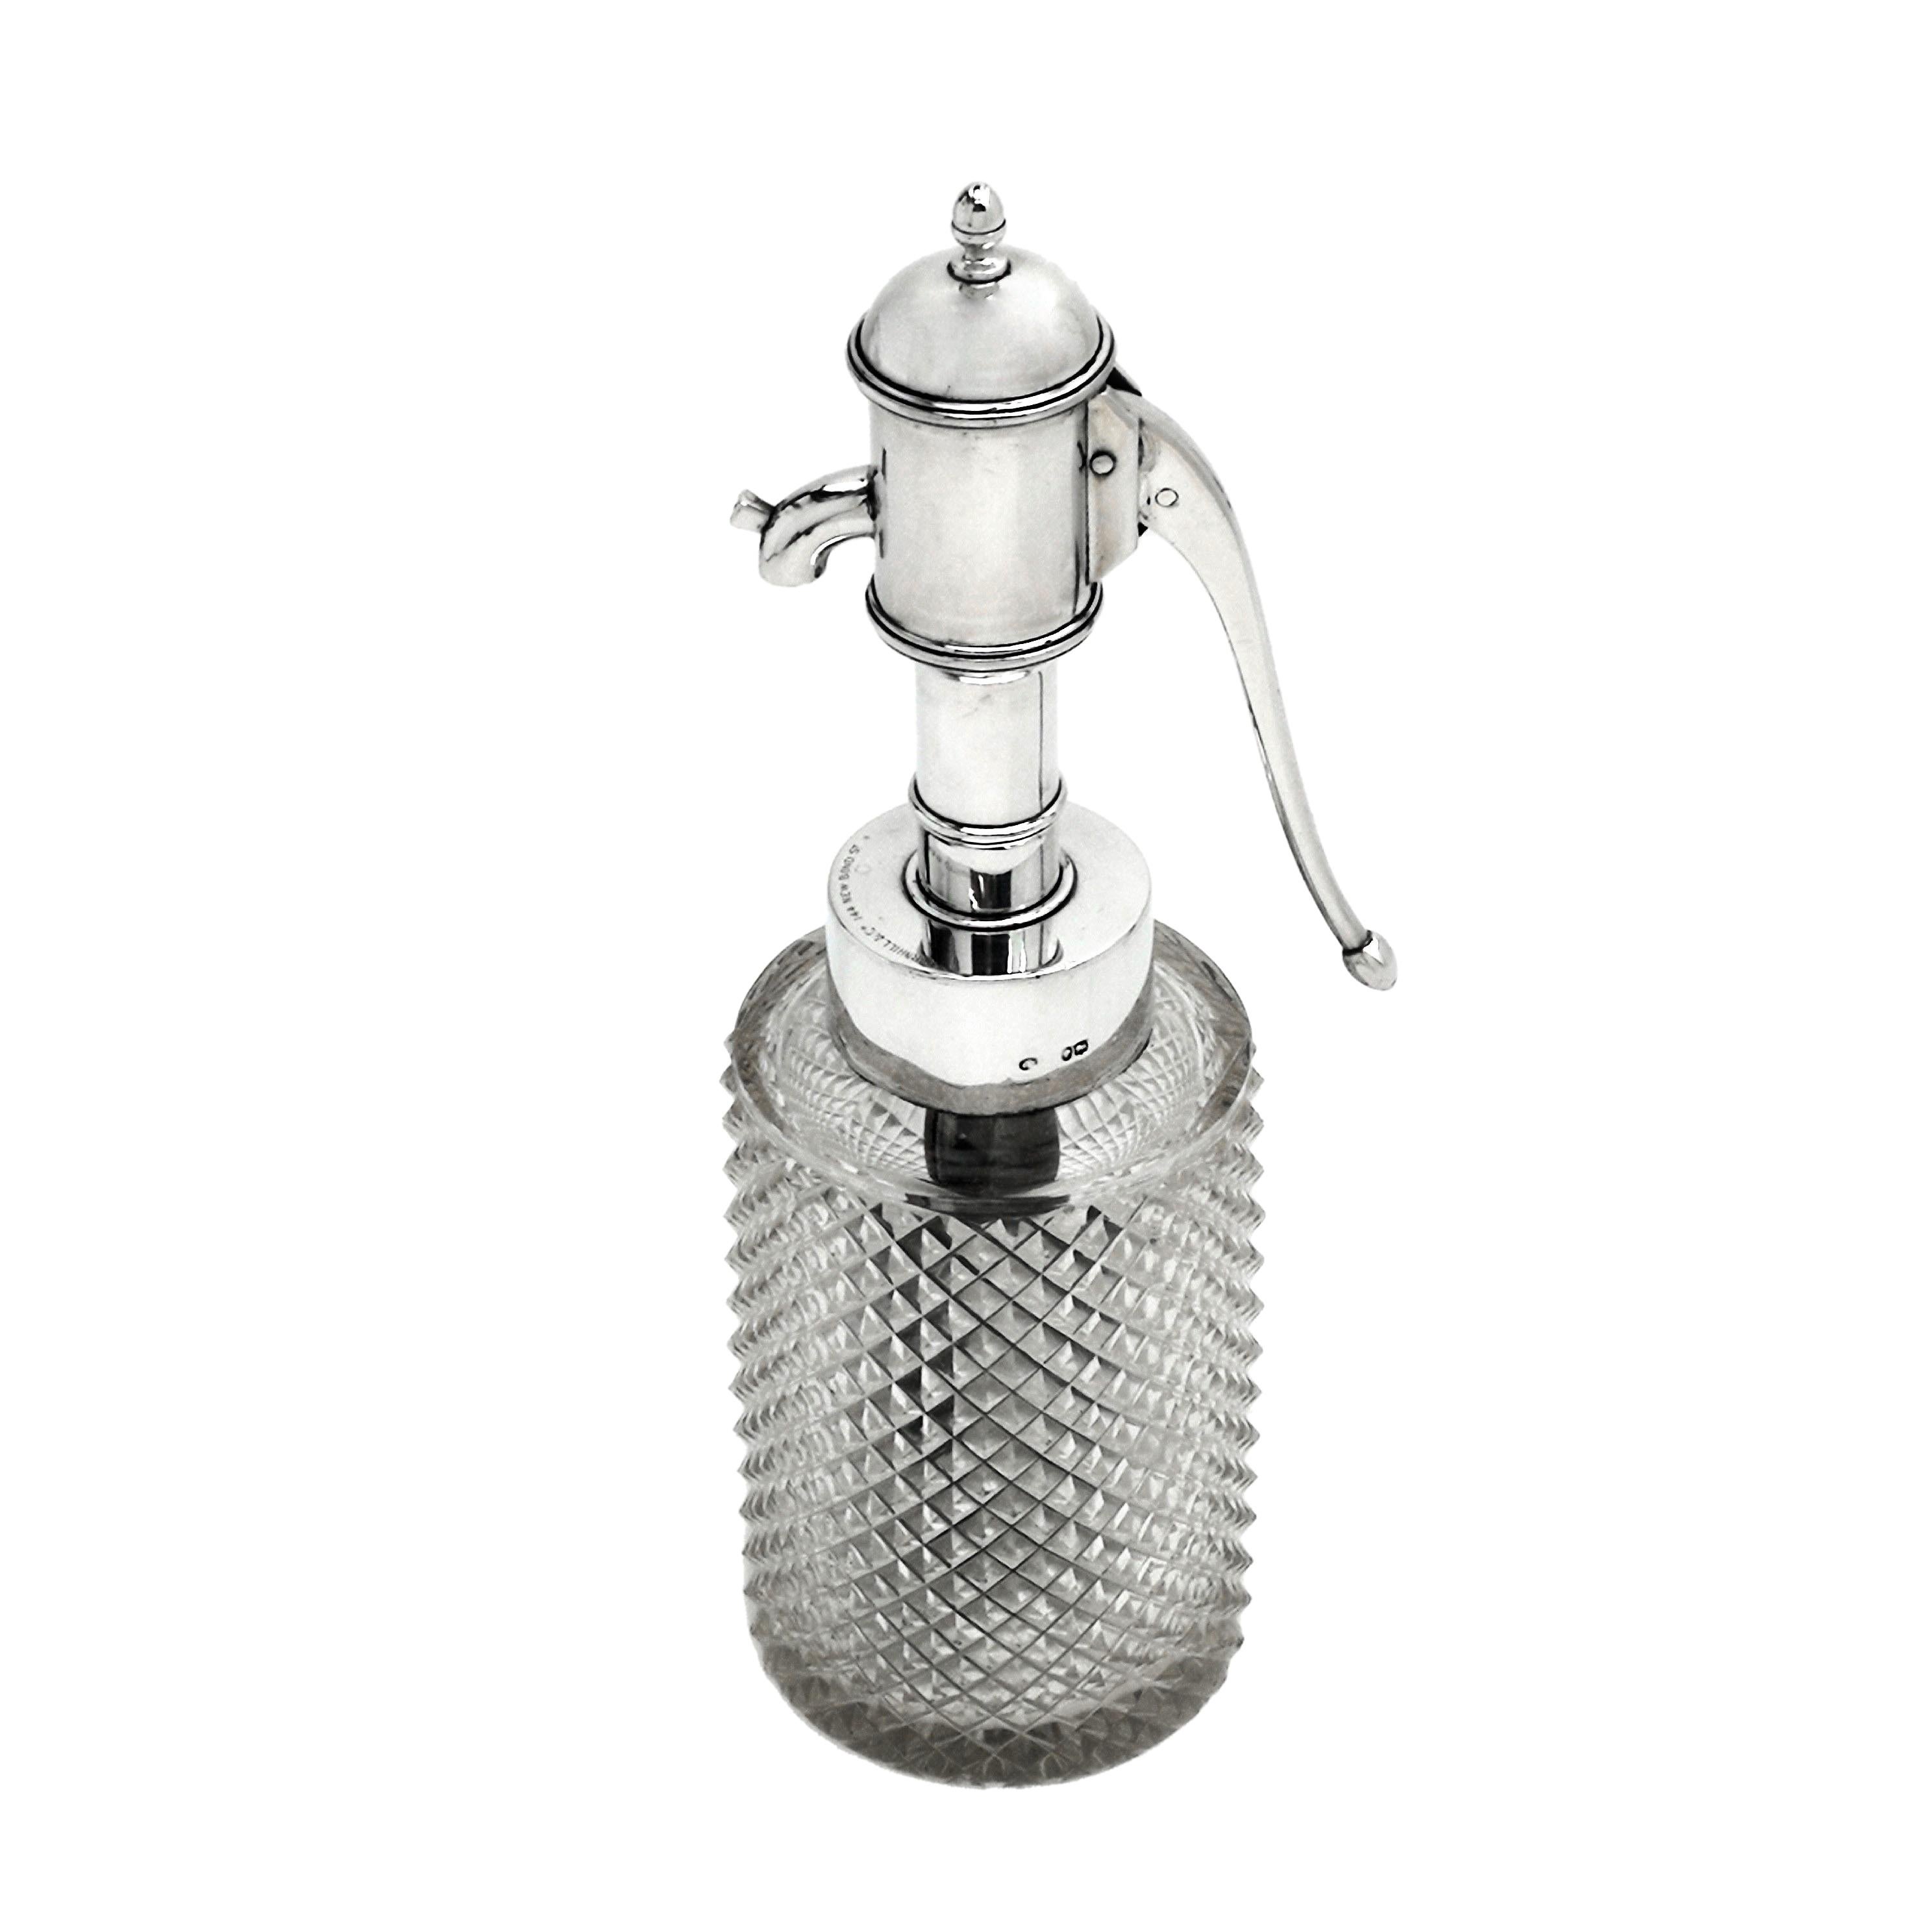 A novel antique Victorian Silver mounted Scent Bottle / Perfumer with a cut glass body. This unusual Scent Bottle is whimsically shaped as a water pump with a tall silver neck with a silver pump handle.
 
 Made in London in 1885 by E H Stockwell.
 
